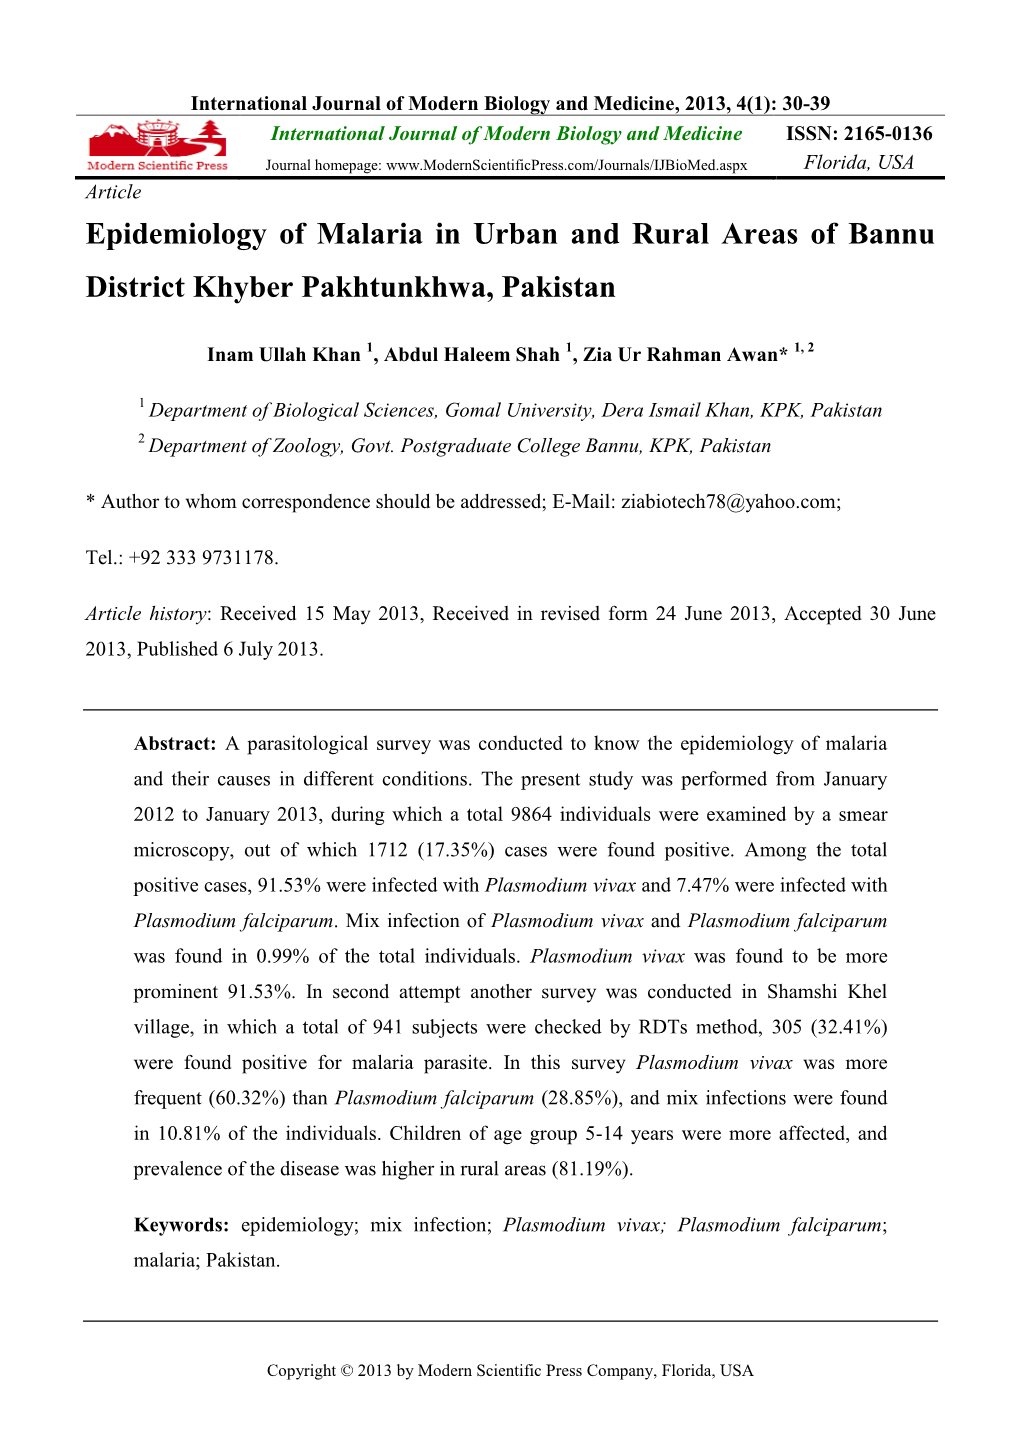 Epidemiology of Malaria in Urban and Rural Areas of Bannu District Khyber Pakhtunkhwa, Pakistan